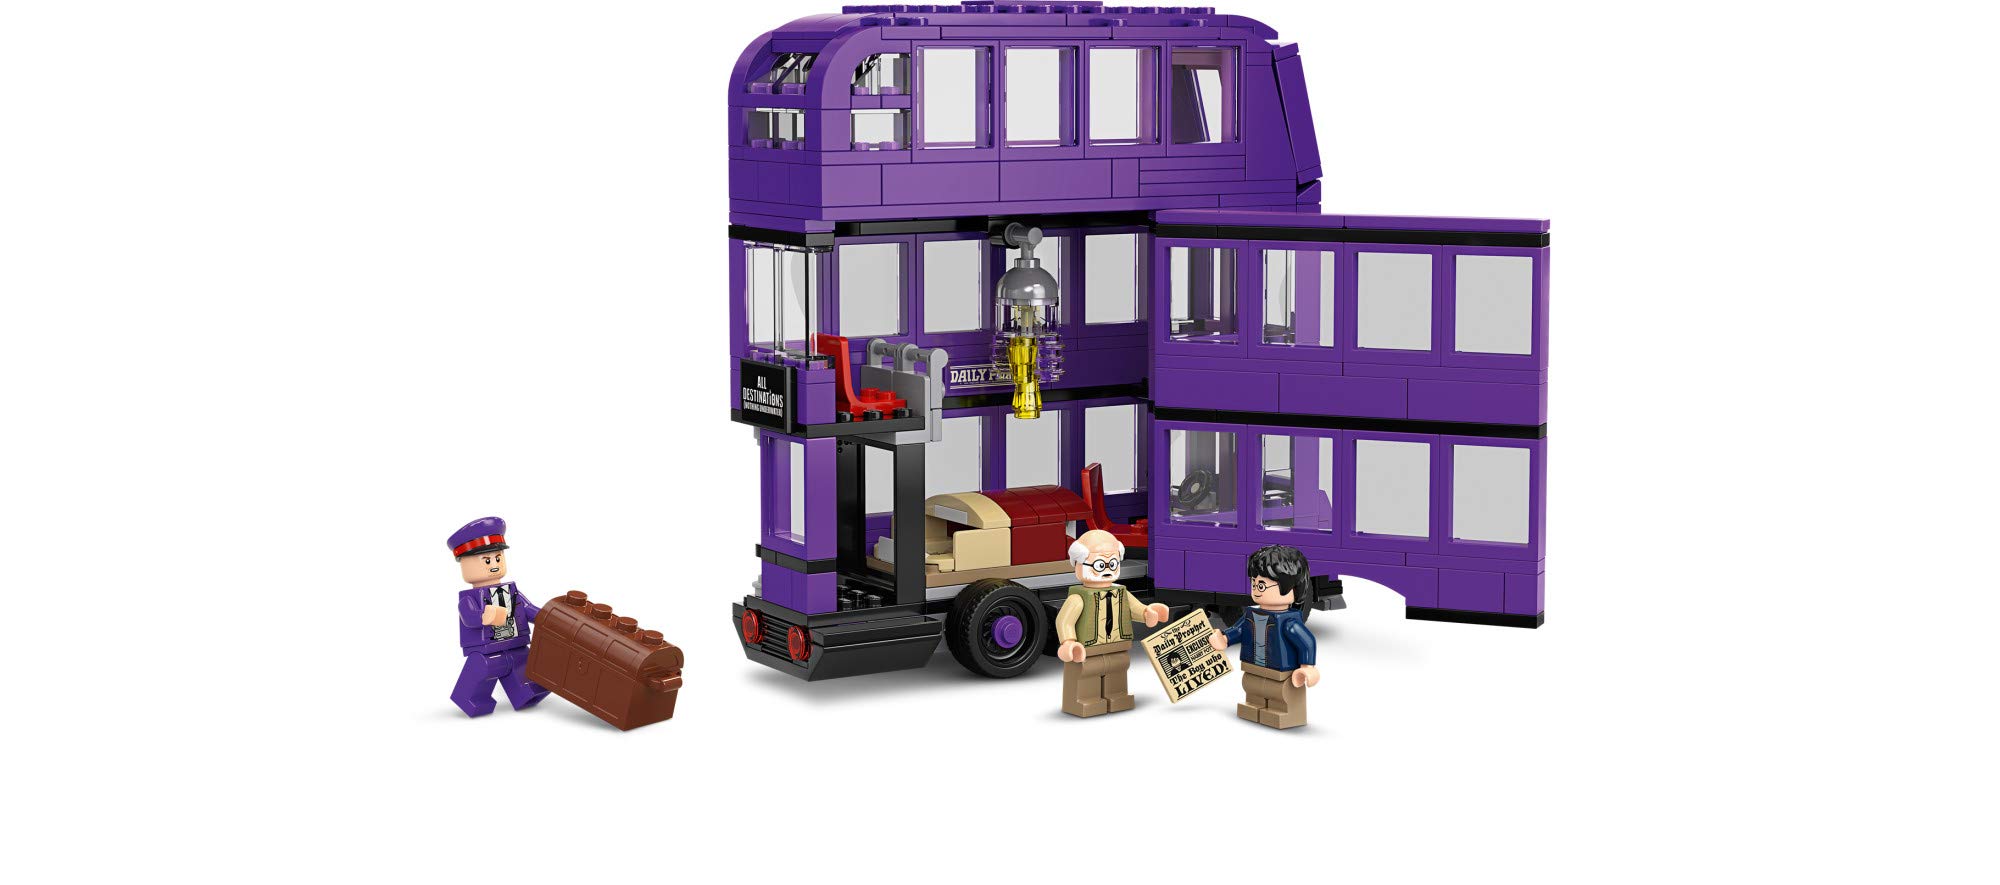 LEGO Harry Potter and The Prisoner of Azkaban Knight Bus 75957 Building Kit, New 2019 (403 Pieces)